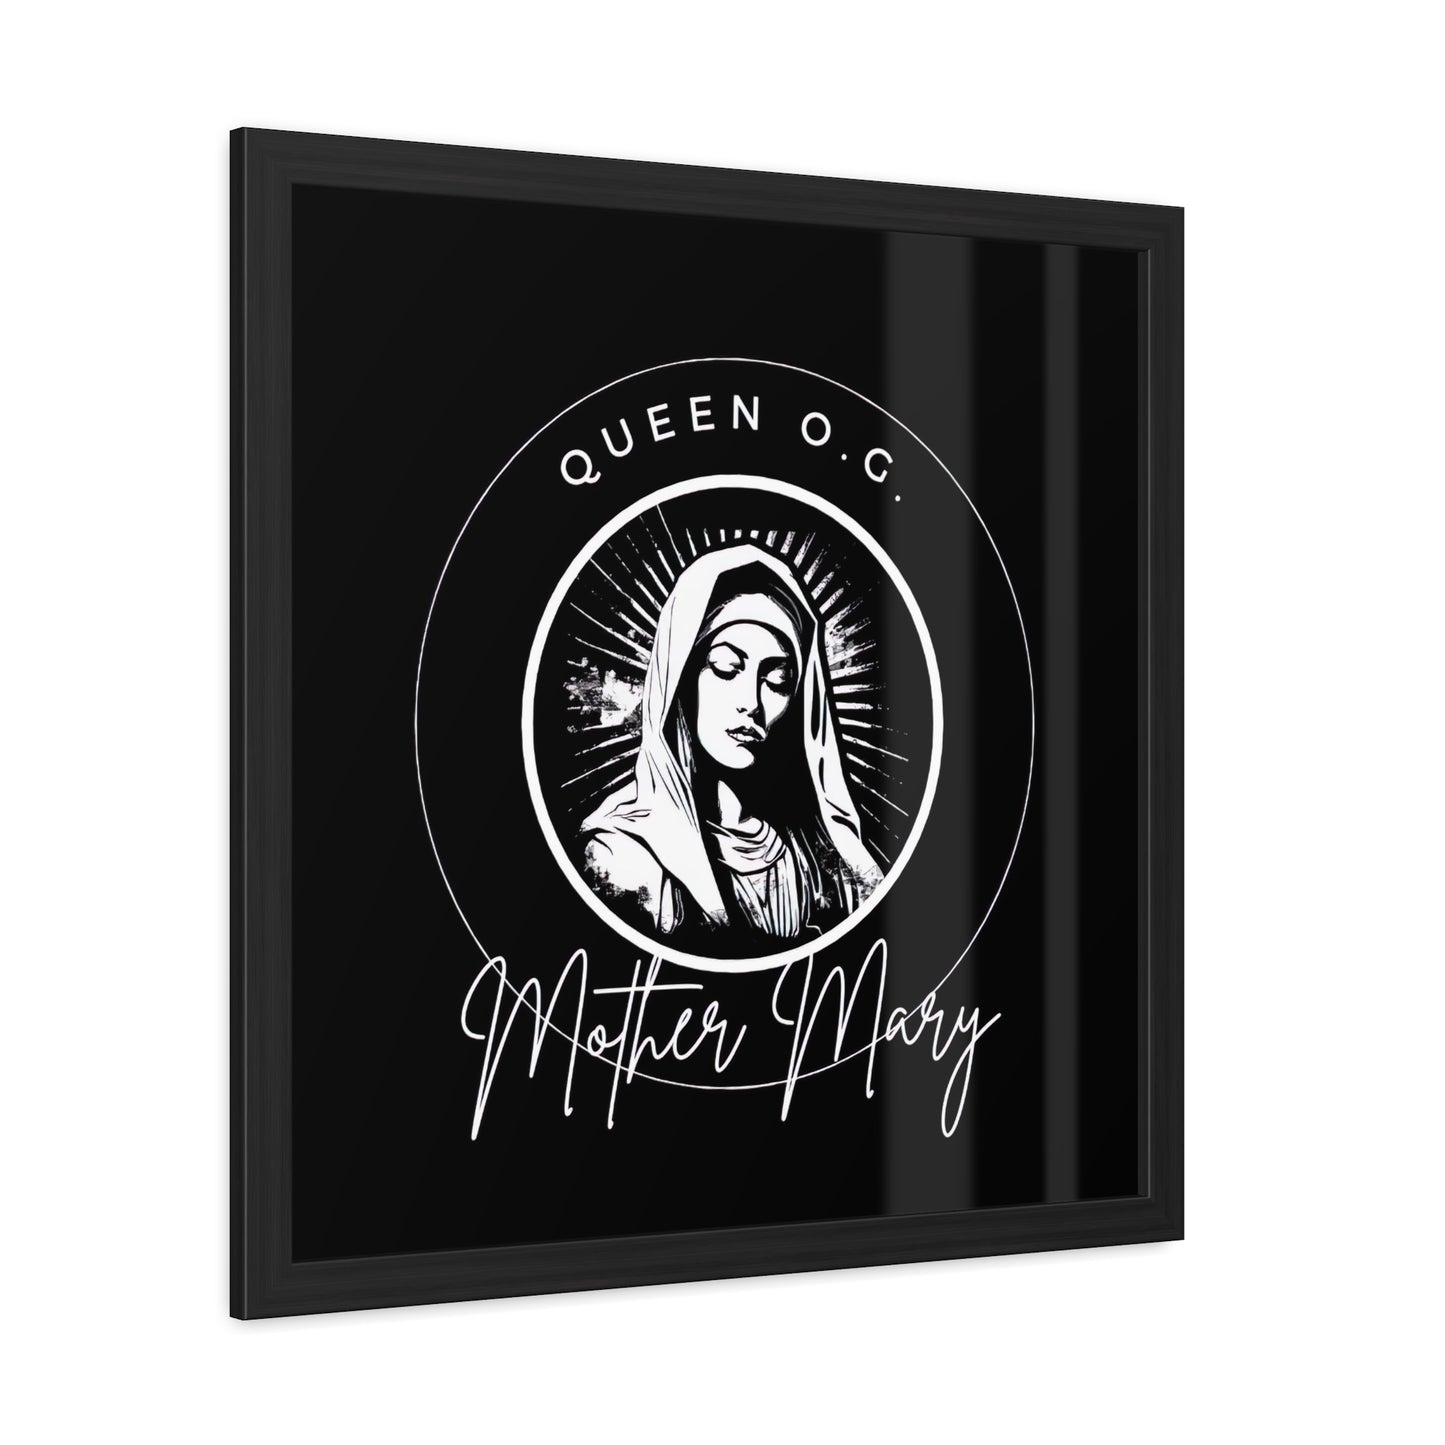 Mother Mary: The Queen O.G - Framed Poster